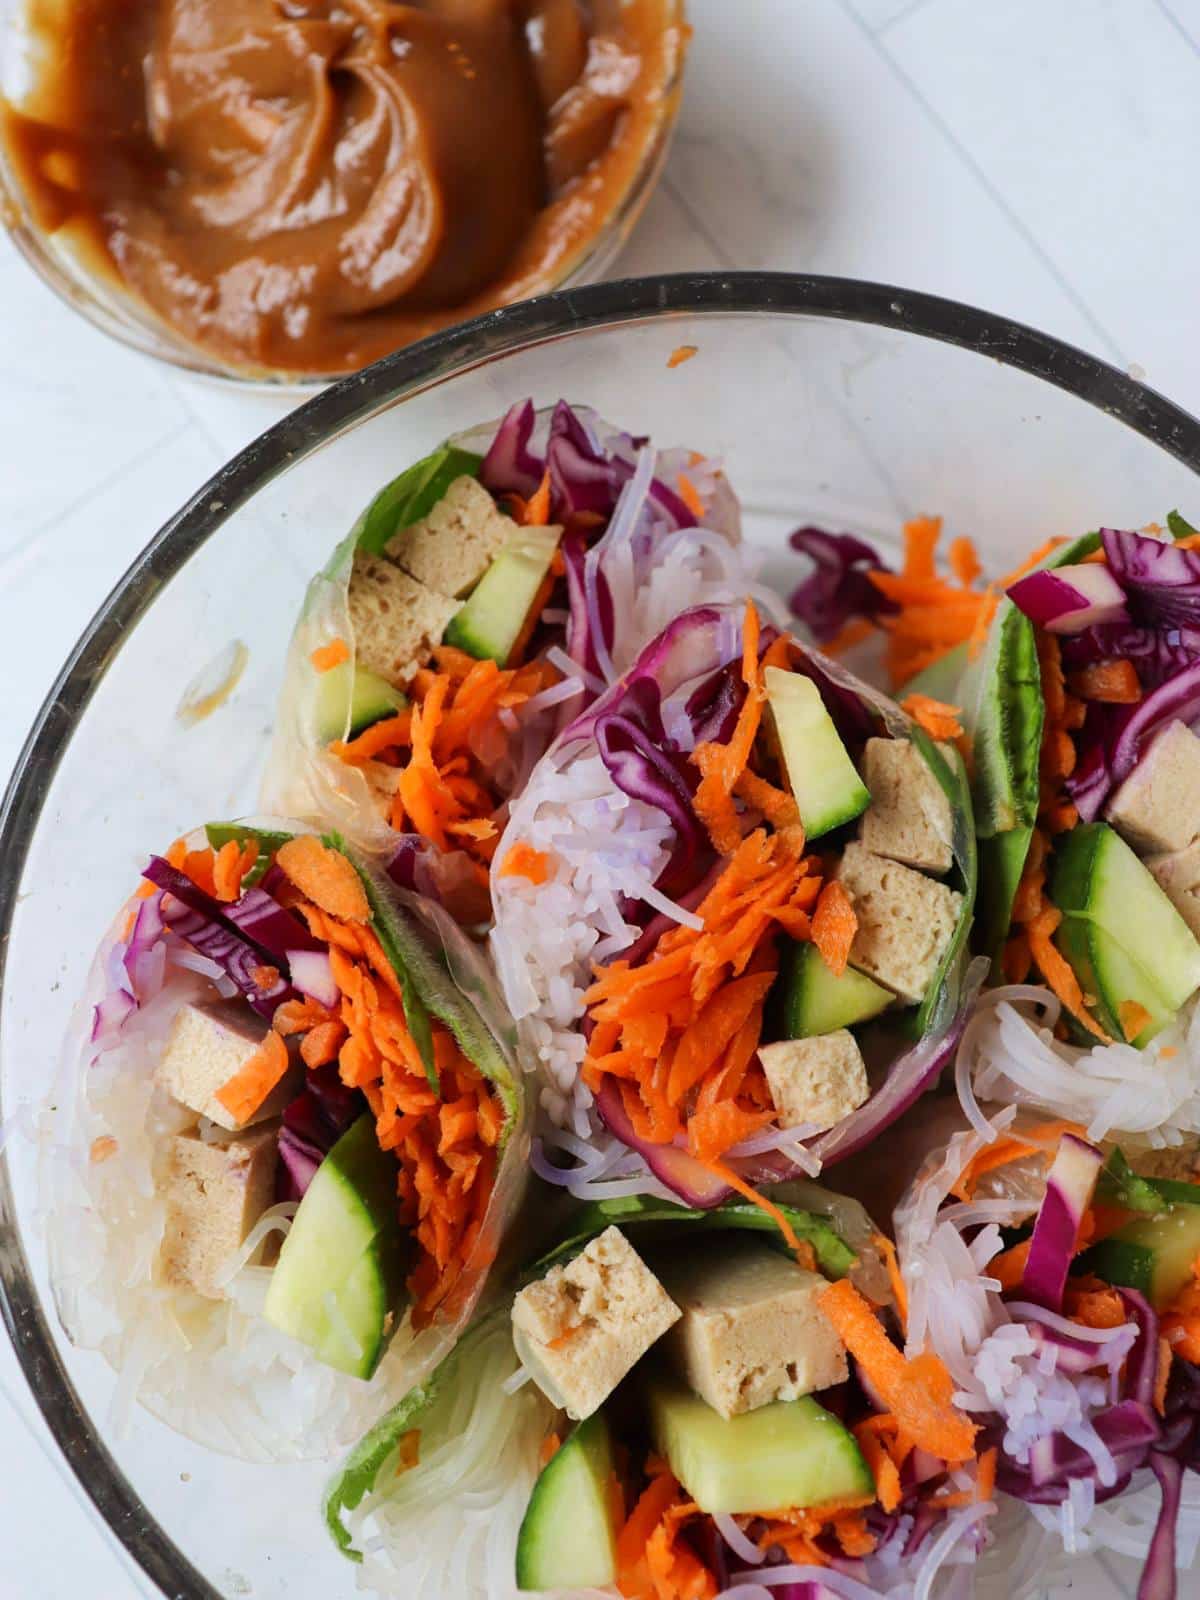 Vegan fresh rolls cut in half and in a bowl next to homemade peanut dipping sauce.